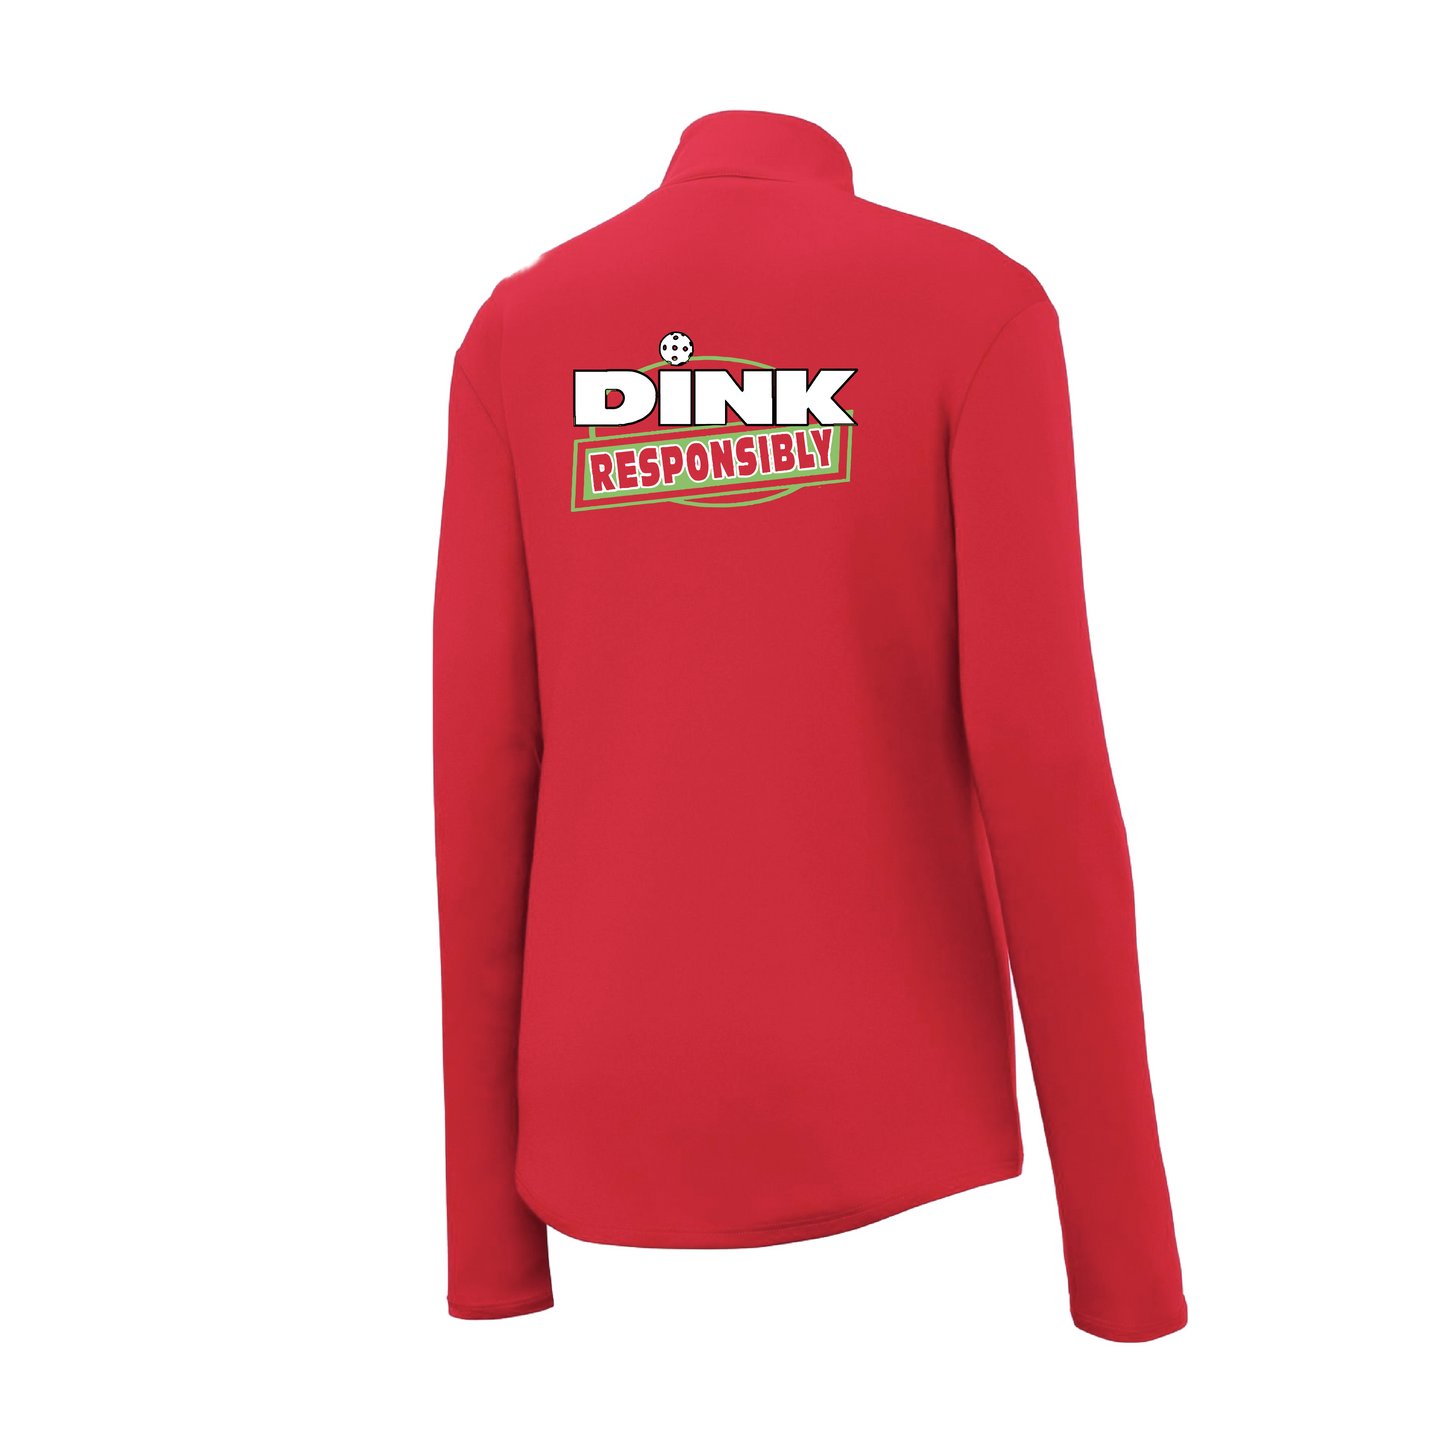 Dink Responsibly | Women's 1/4 Zip Pickleball Pullover | 100% Polyester